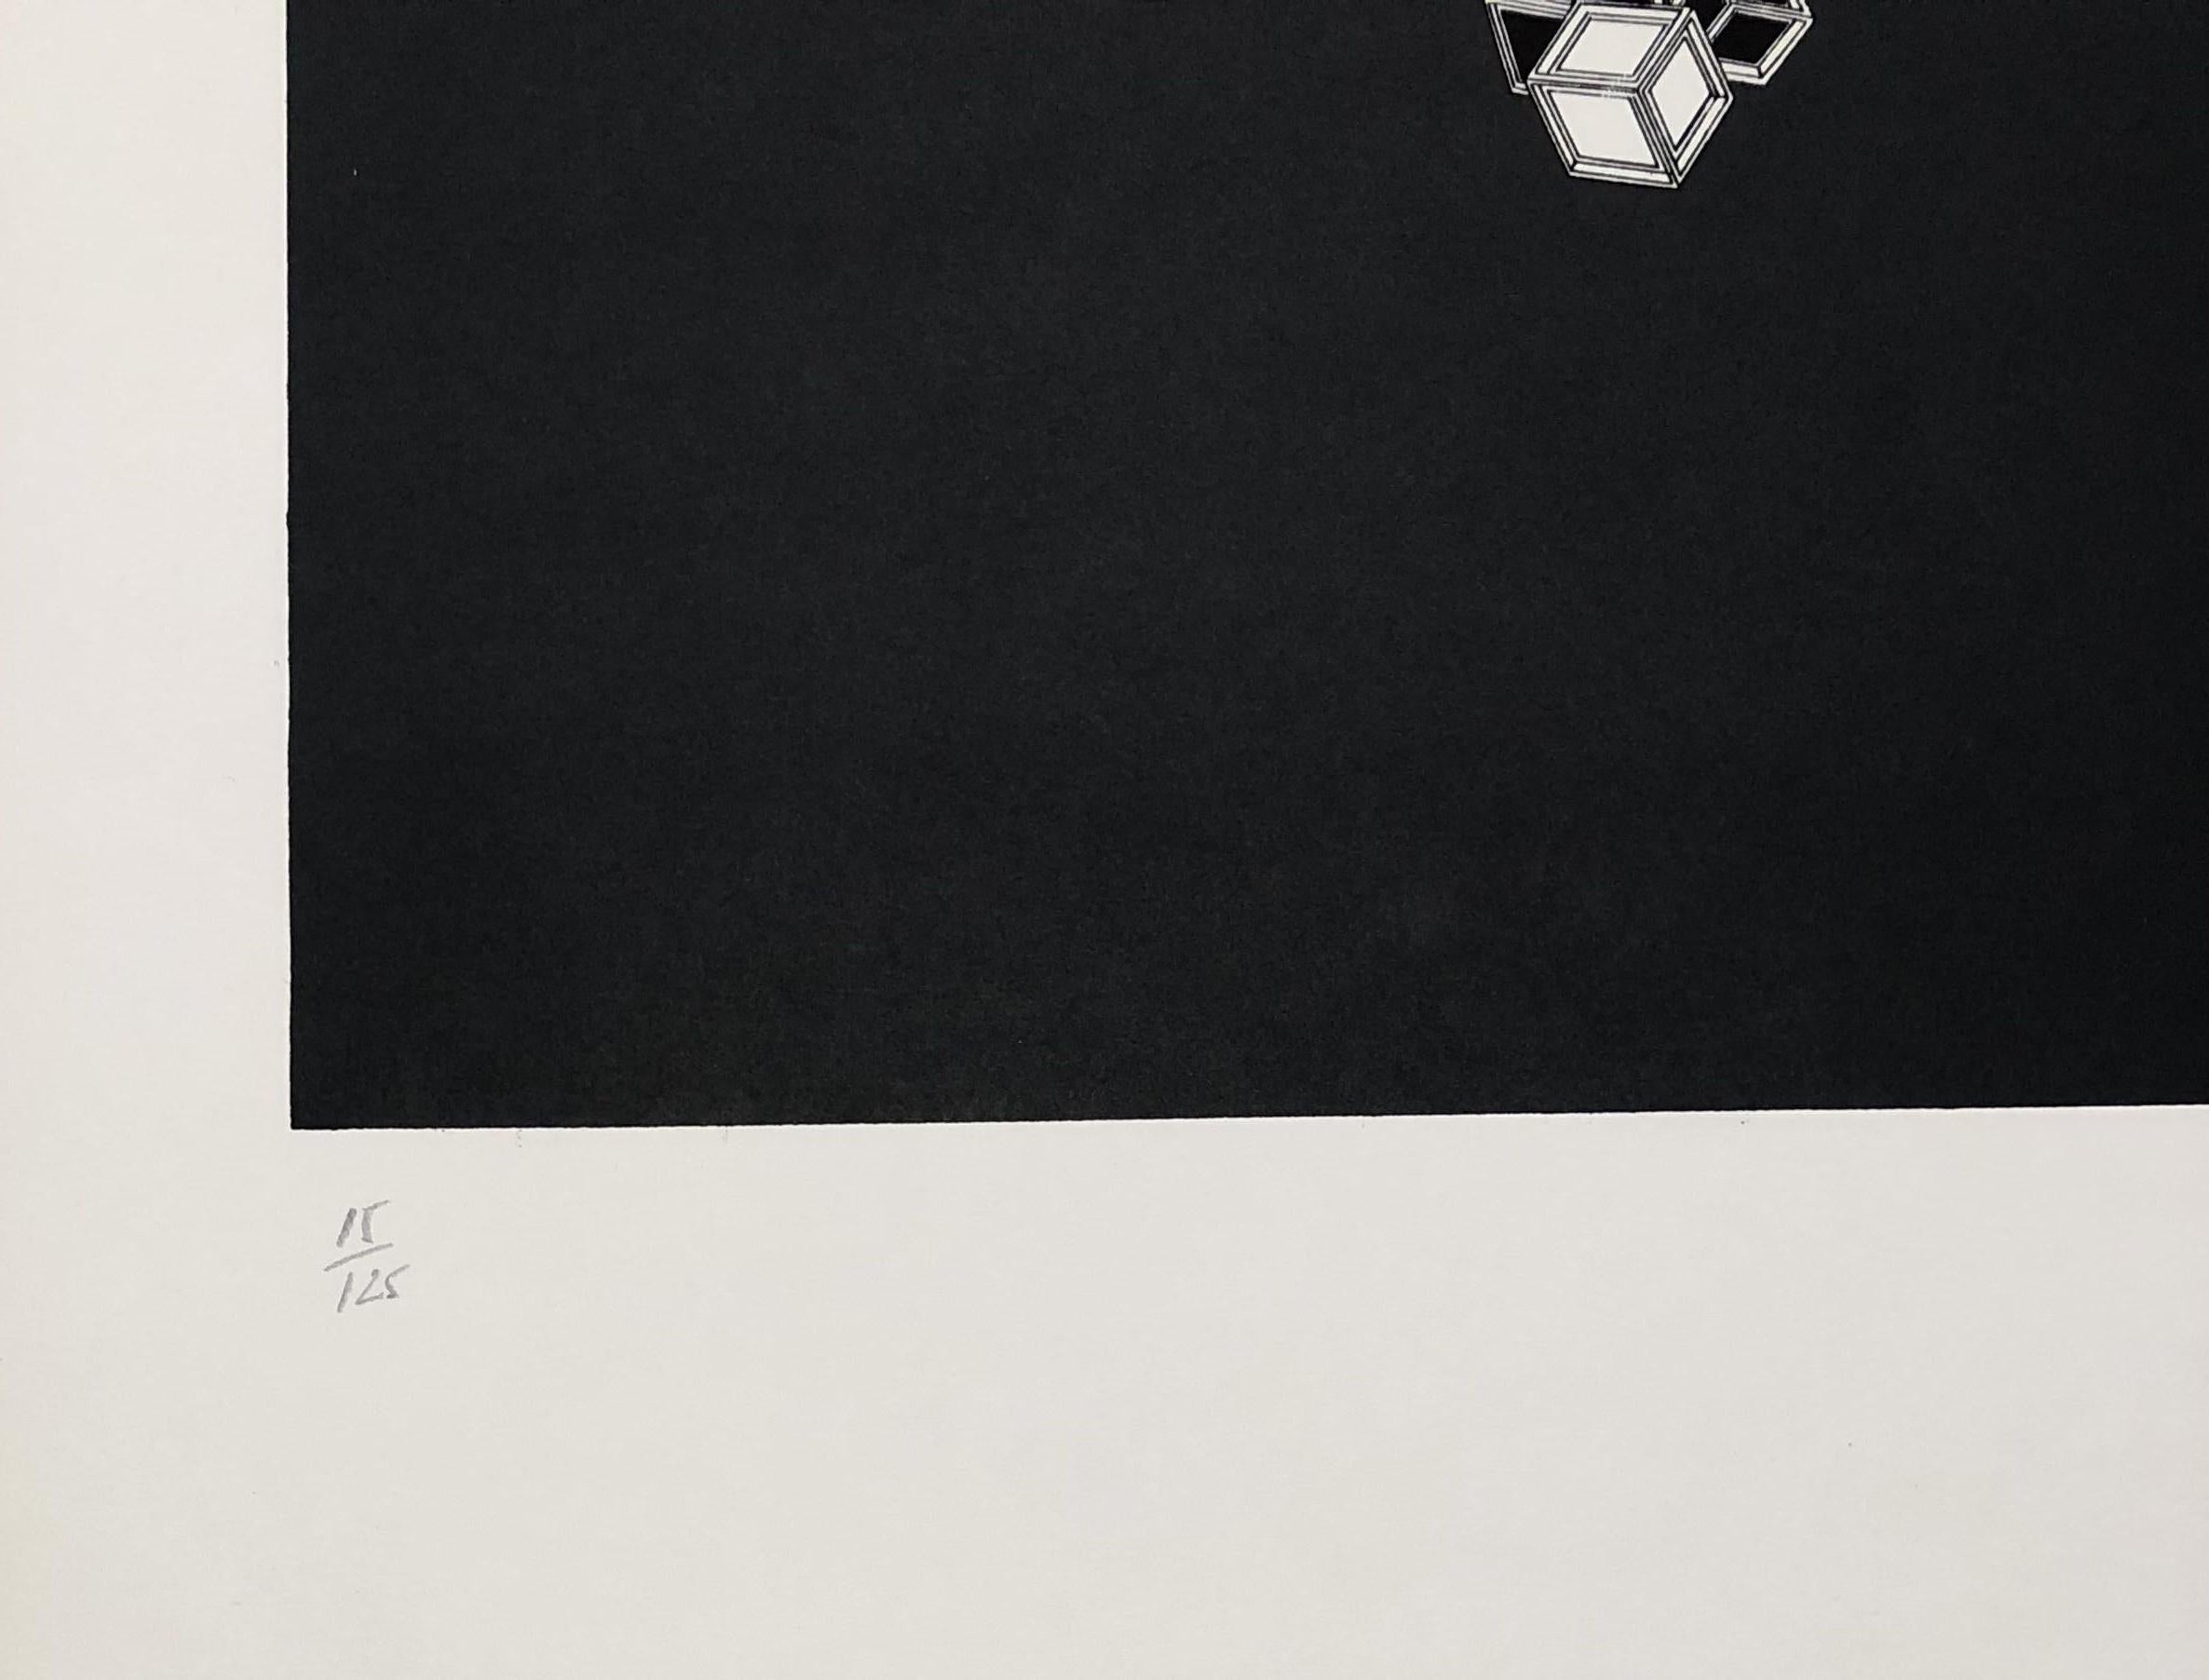 Geometric Composition IX - Original Lithograph Handsigned - 125 copies - Black Abstract Print by Alain Le Yaouanc